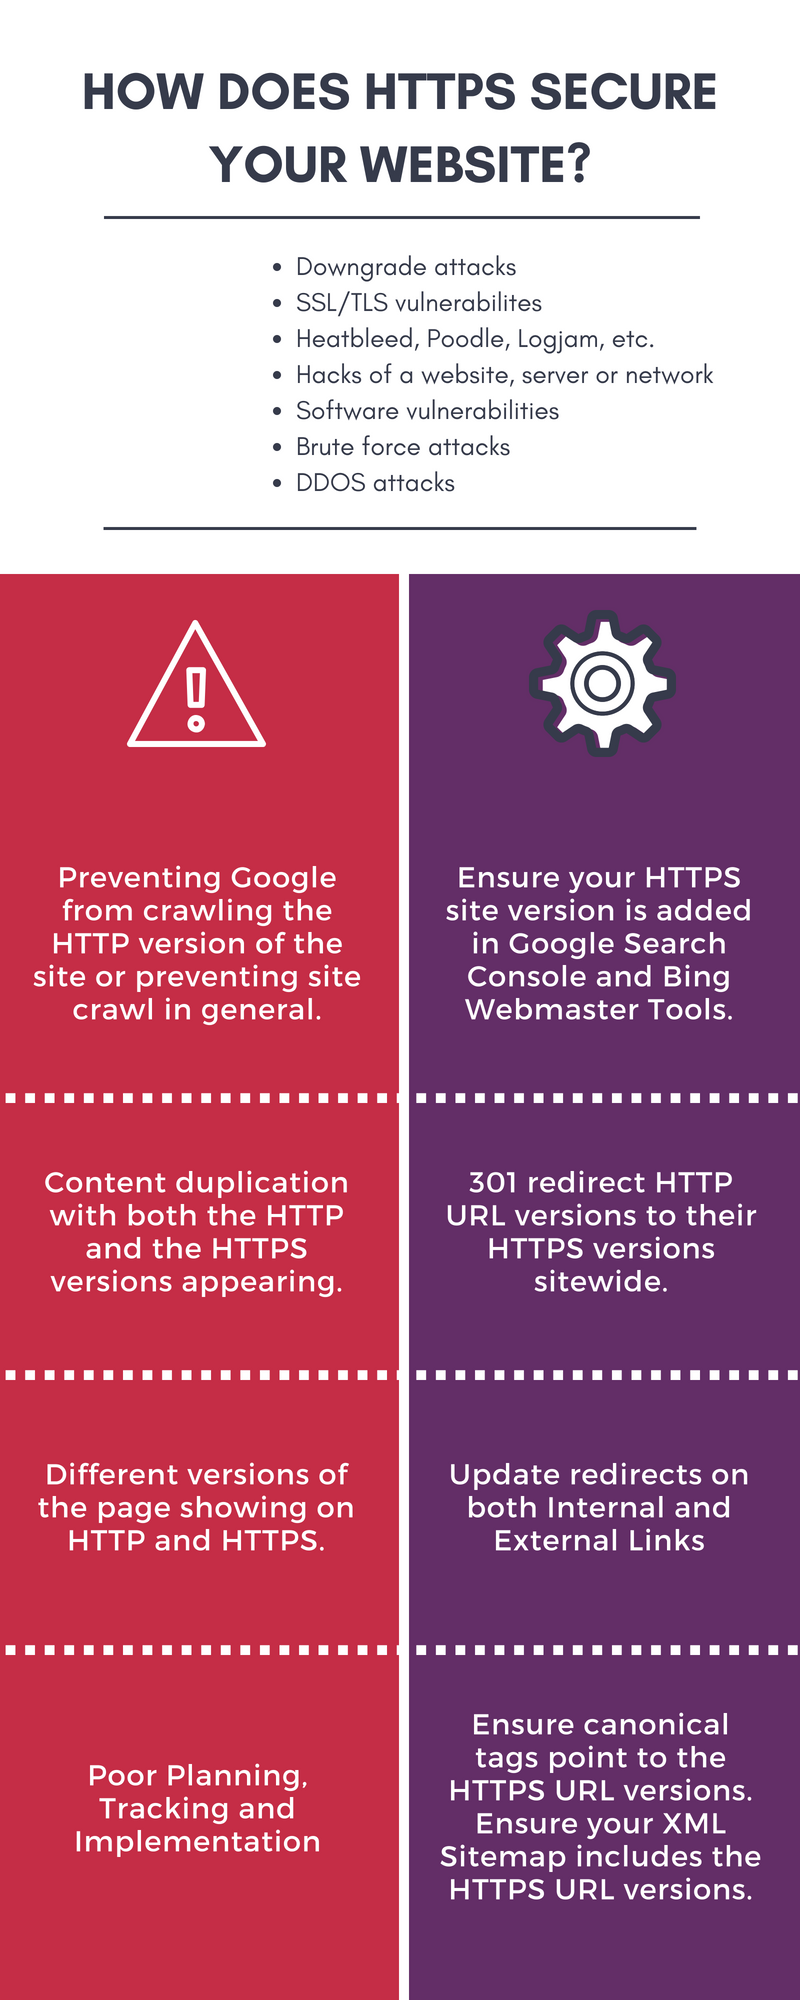 how https secures your website infograph